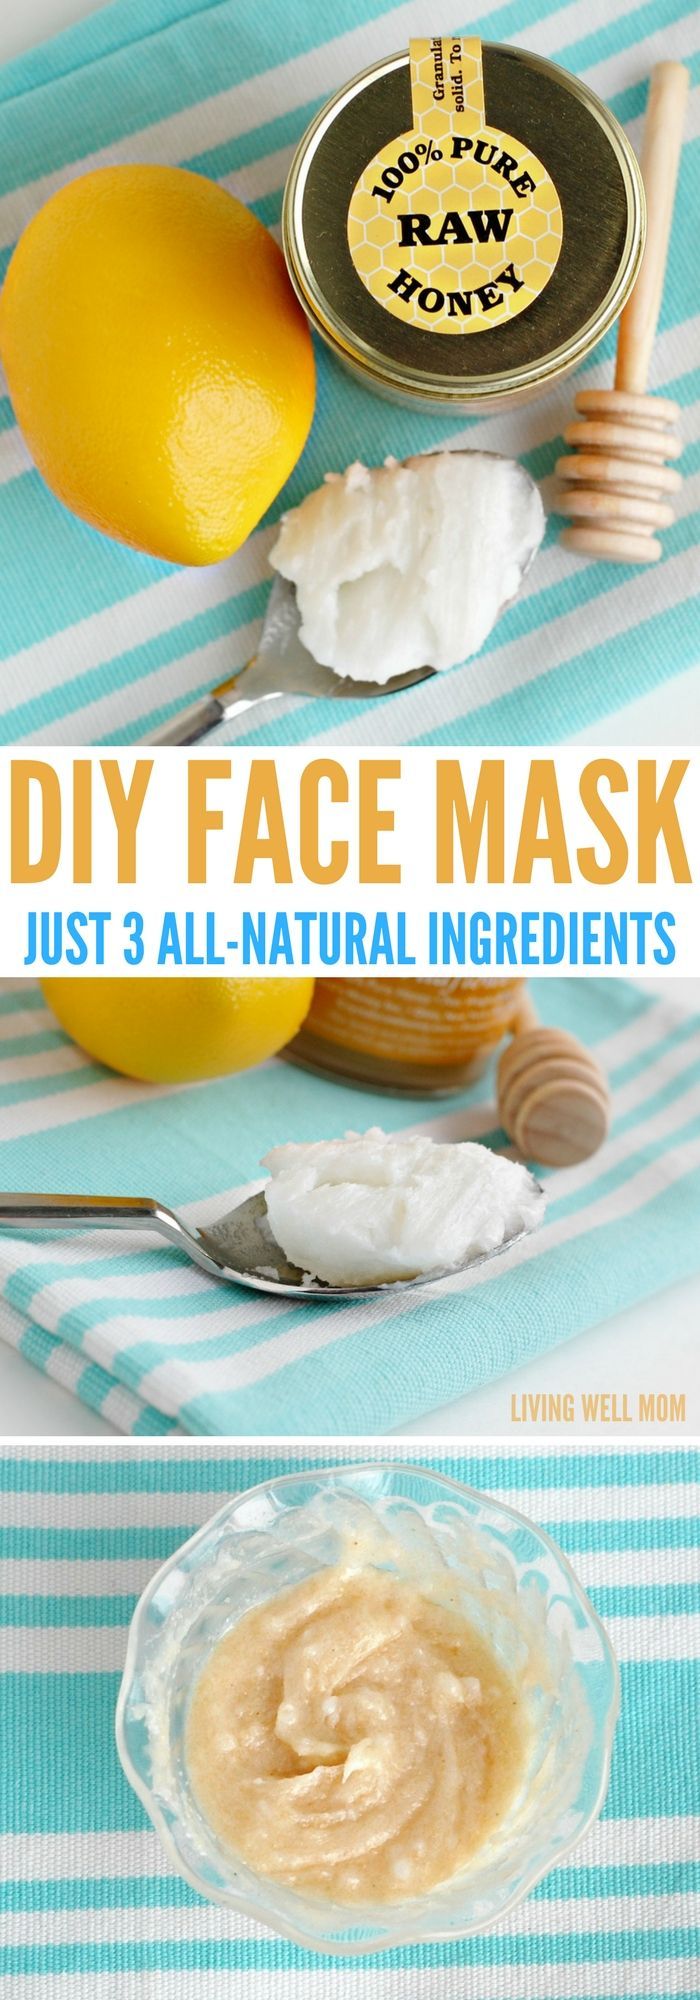 DIY Face Mask with All-Natural Ingredients - DIY Face Mask with All-Natural Ingredients -   14 diy Face Mask simple ideas